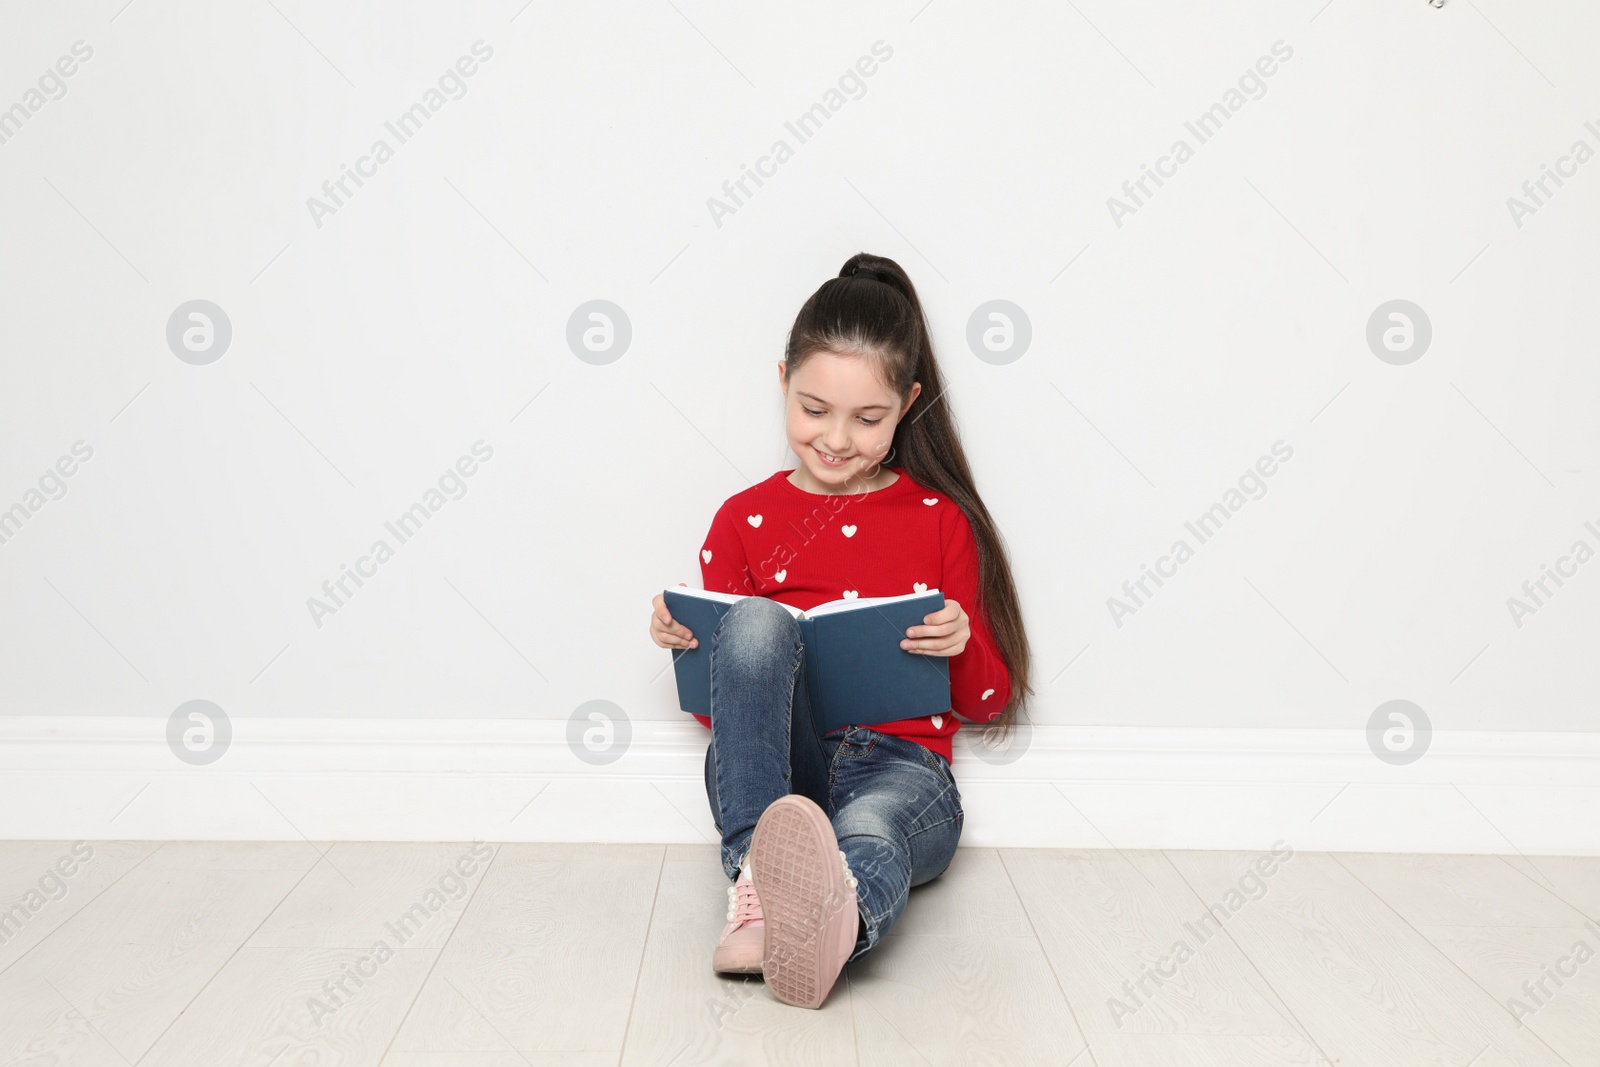 Photo of Cute little girl reading book on floor near white wall, space for text